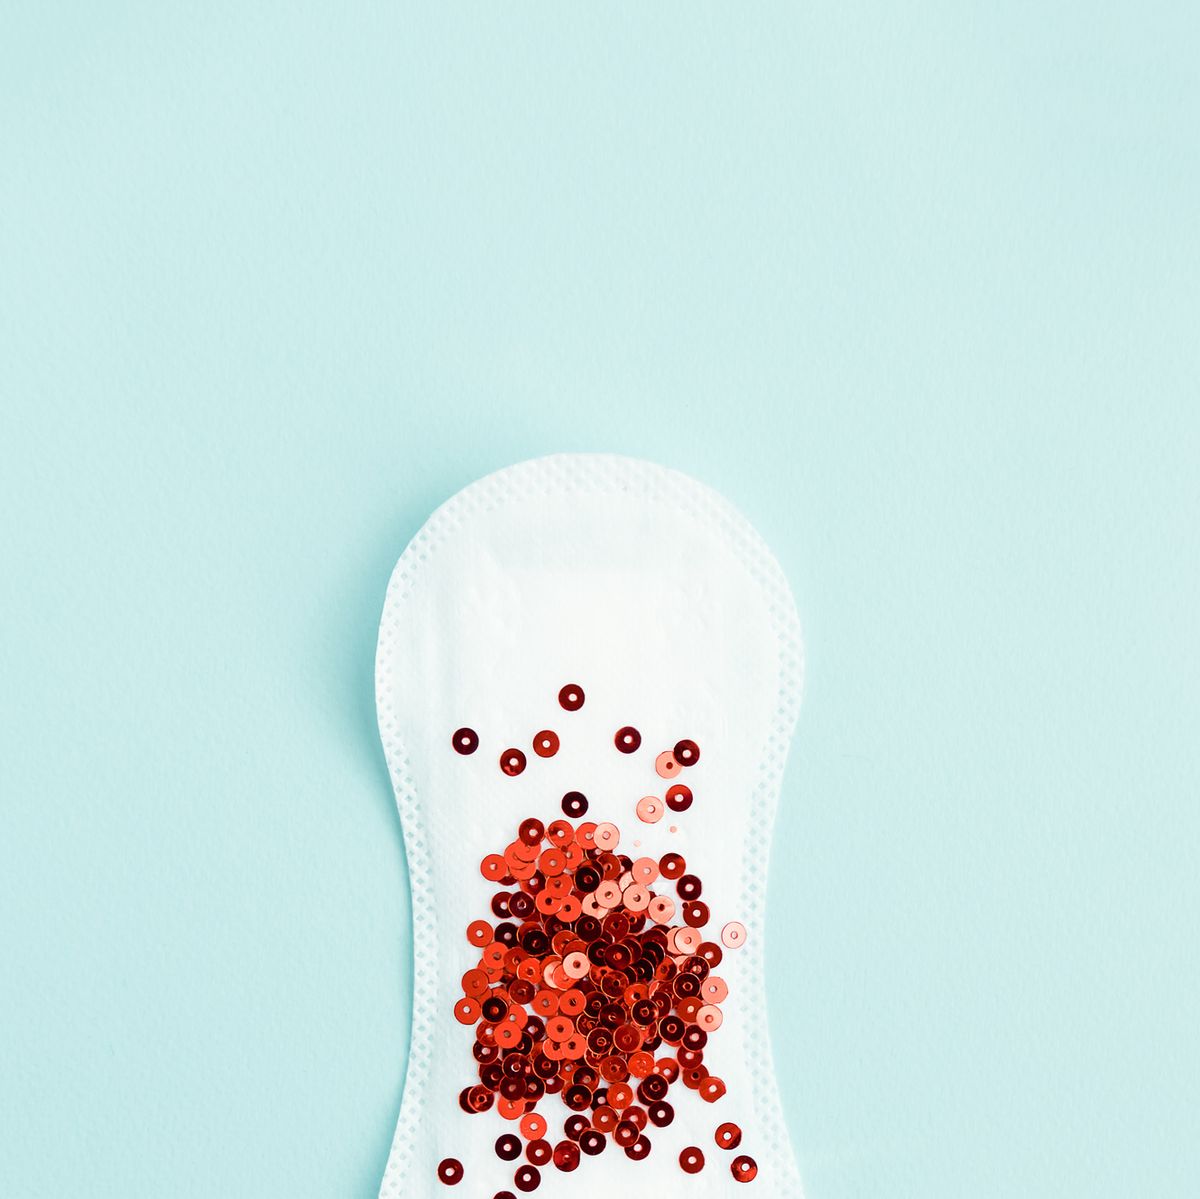 Period Blood Clots: Should You Be Concerned?